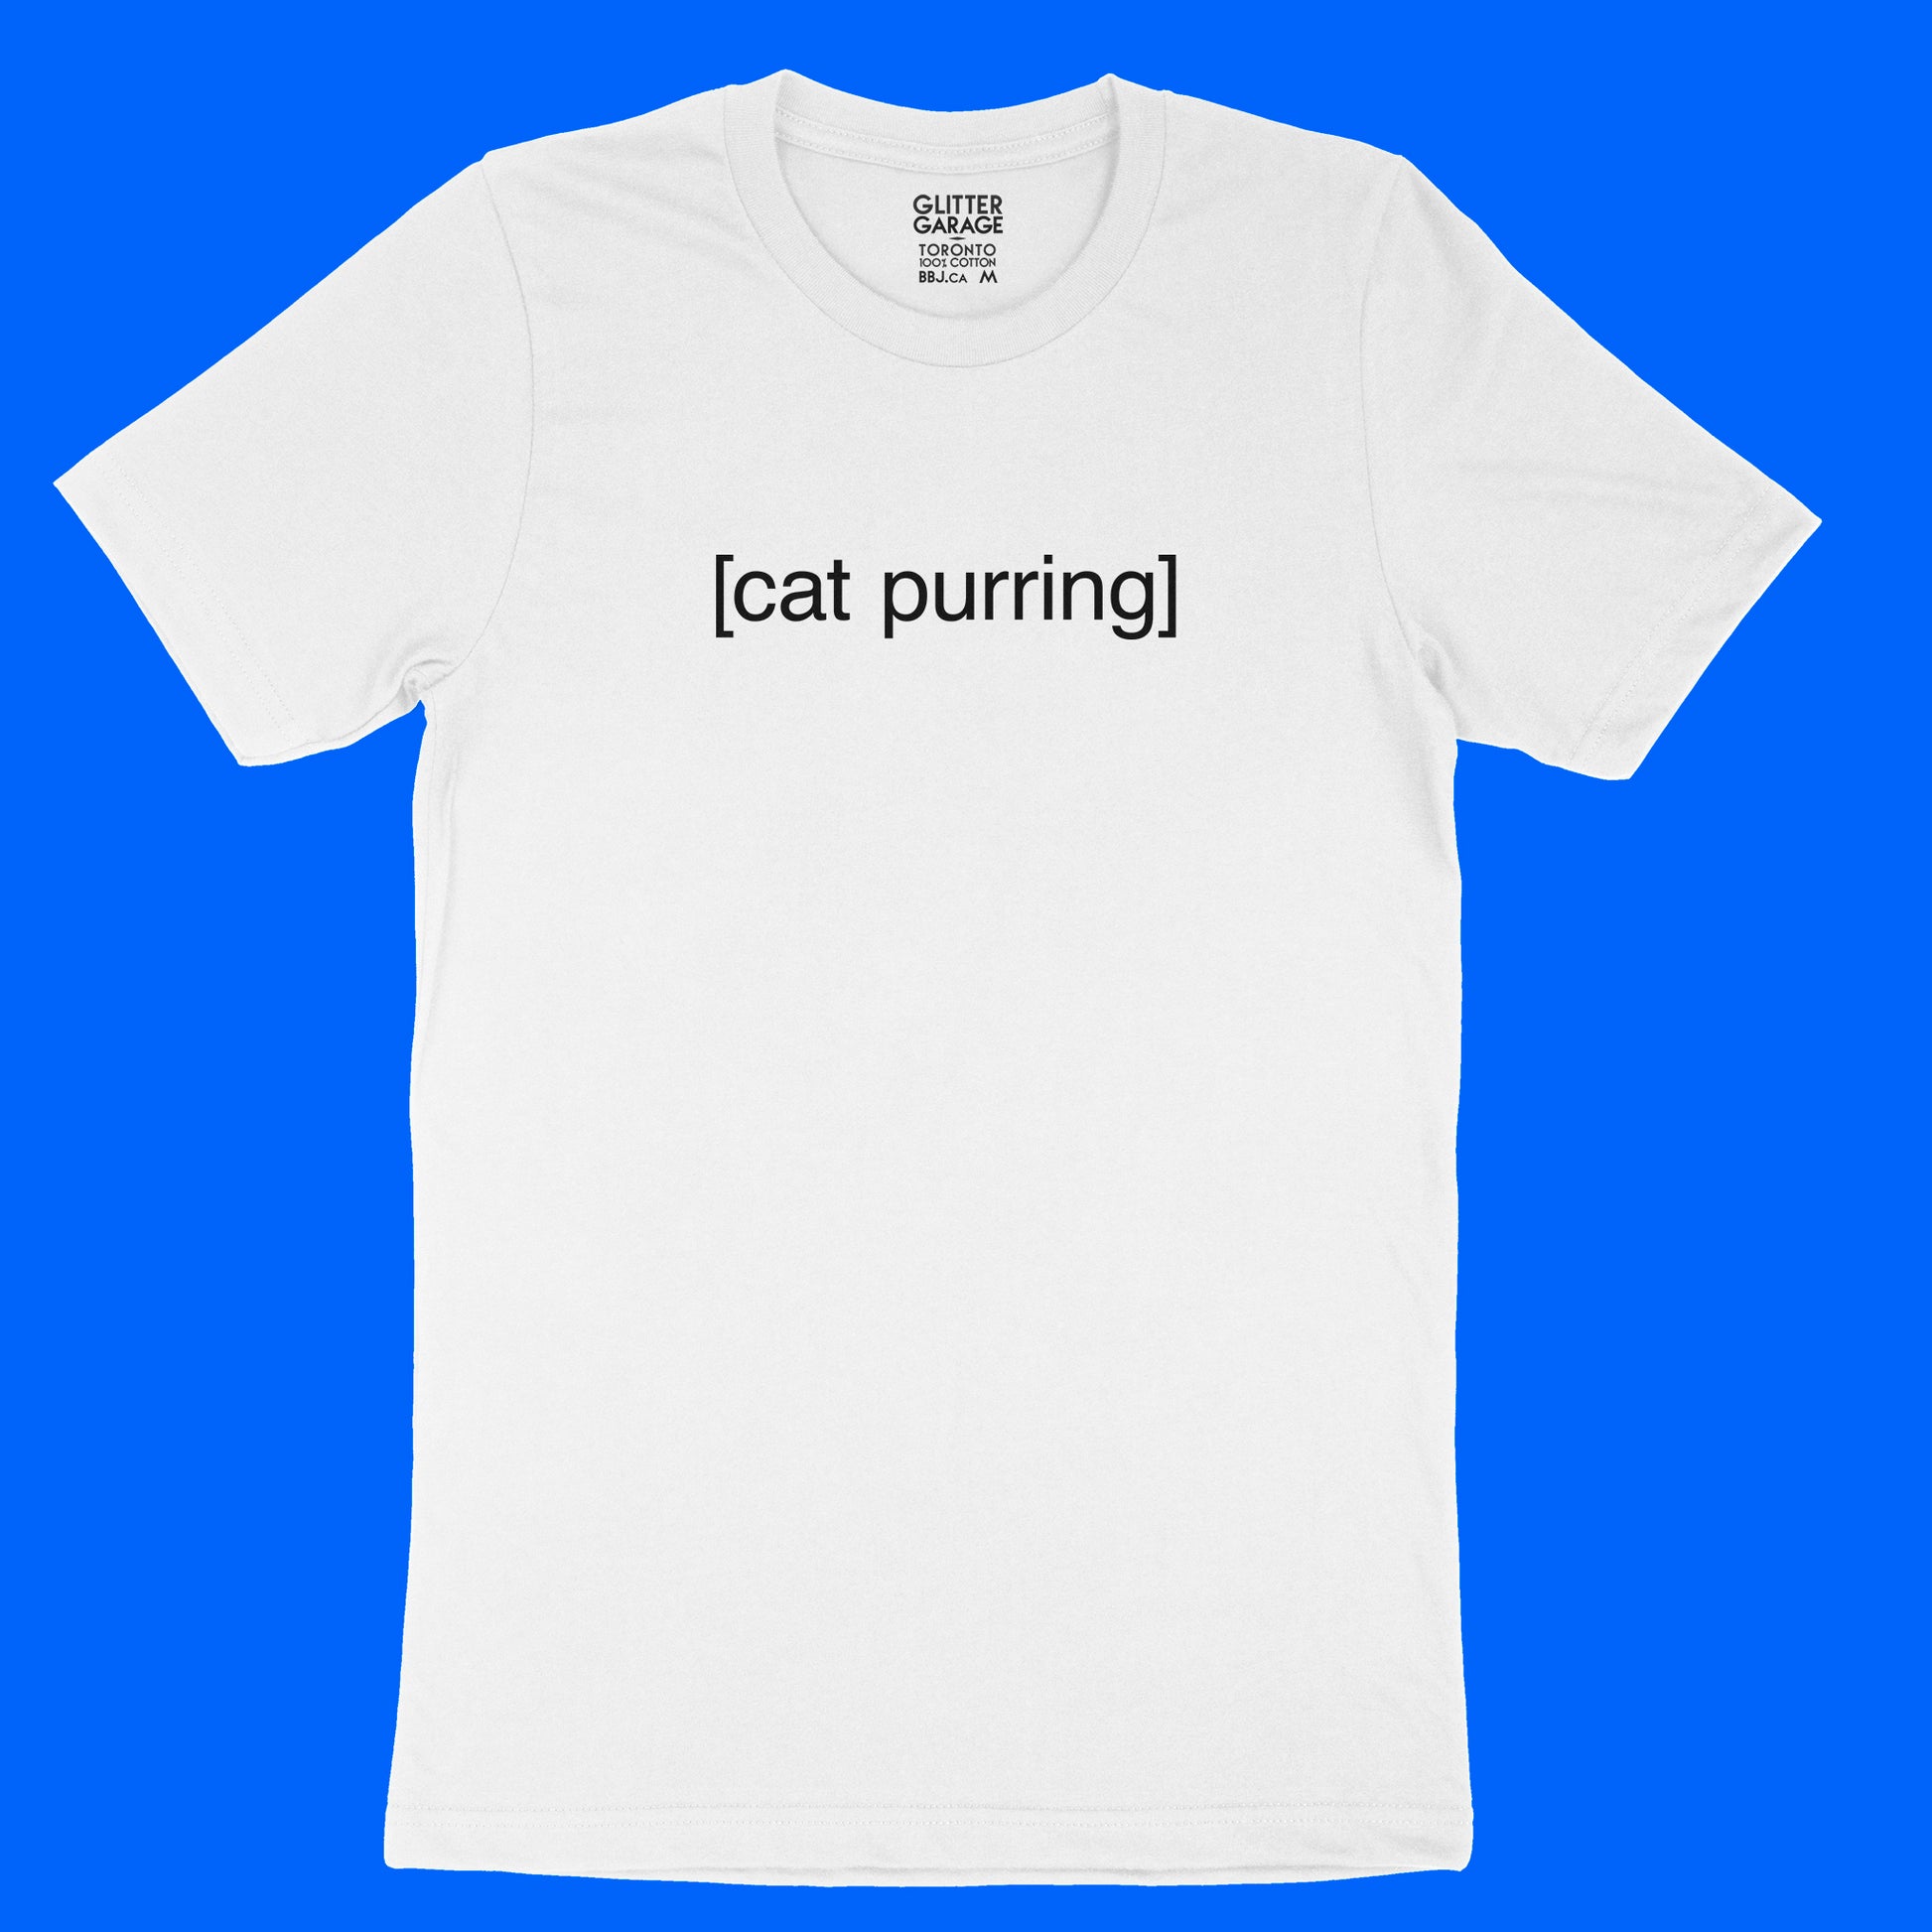 White unisex cotton t-shirt with [cat purring] in black text by BBJ / Glitter Garage